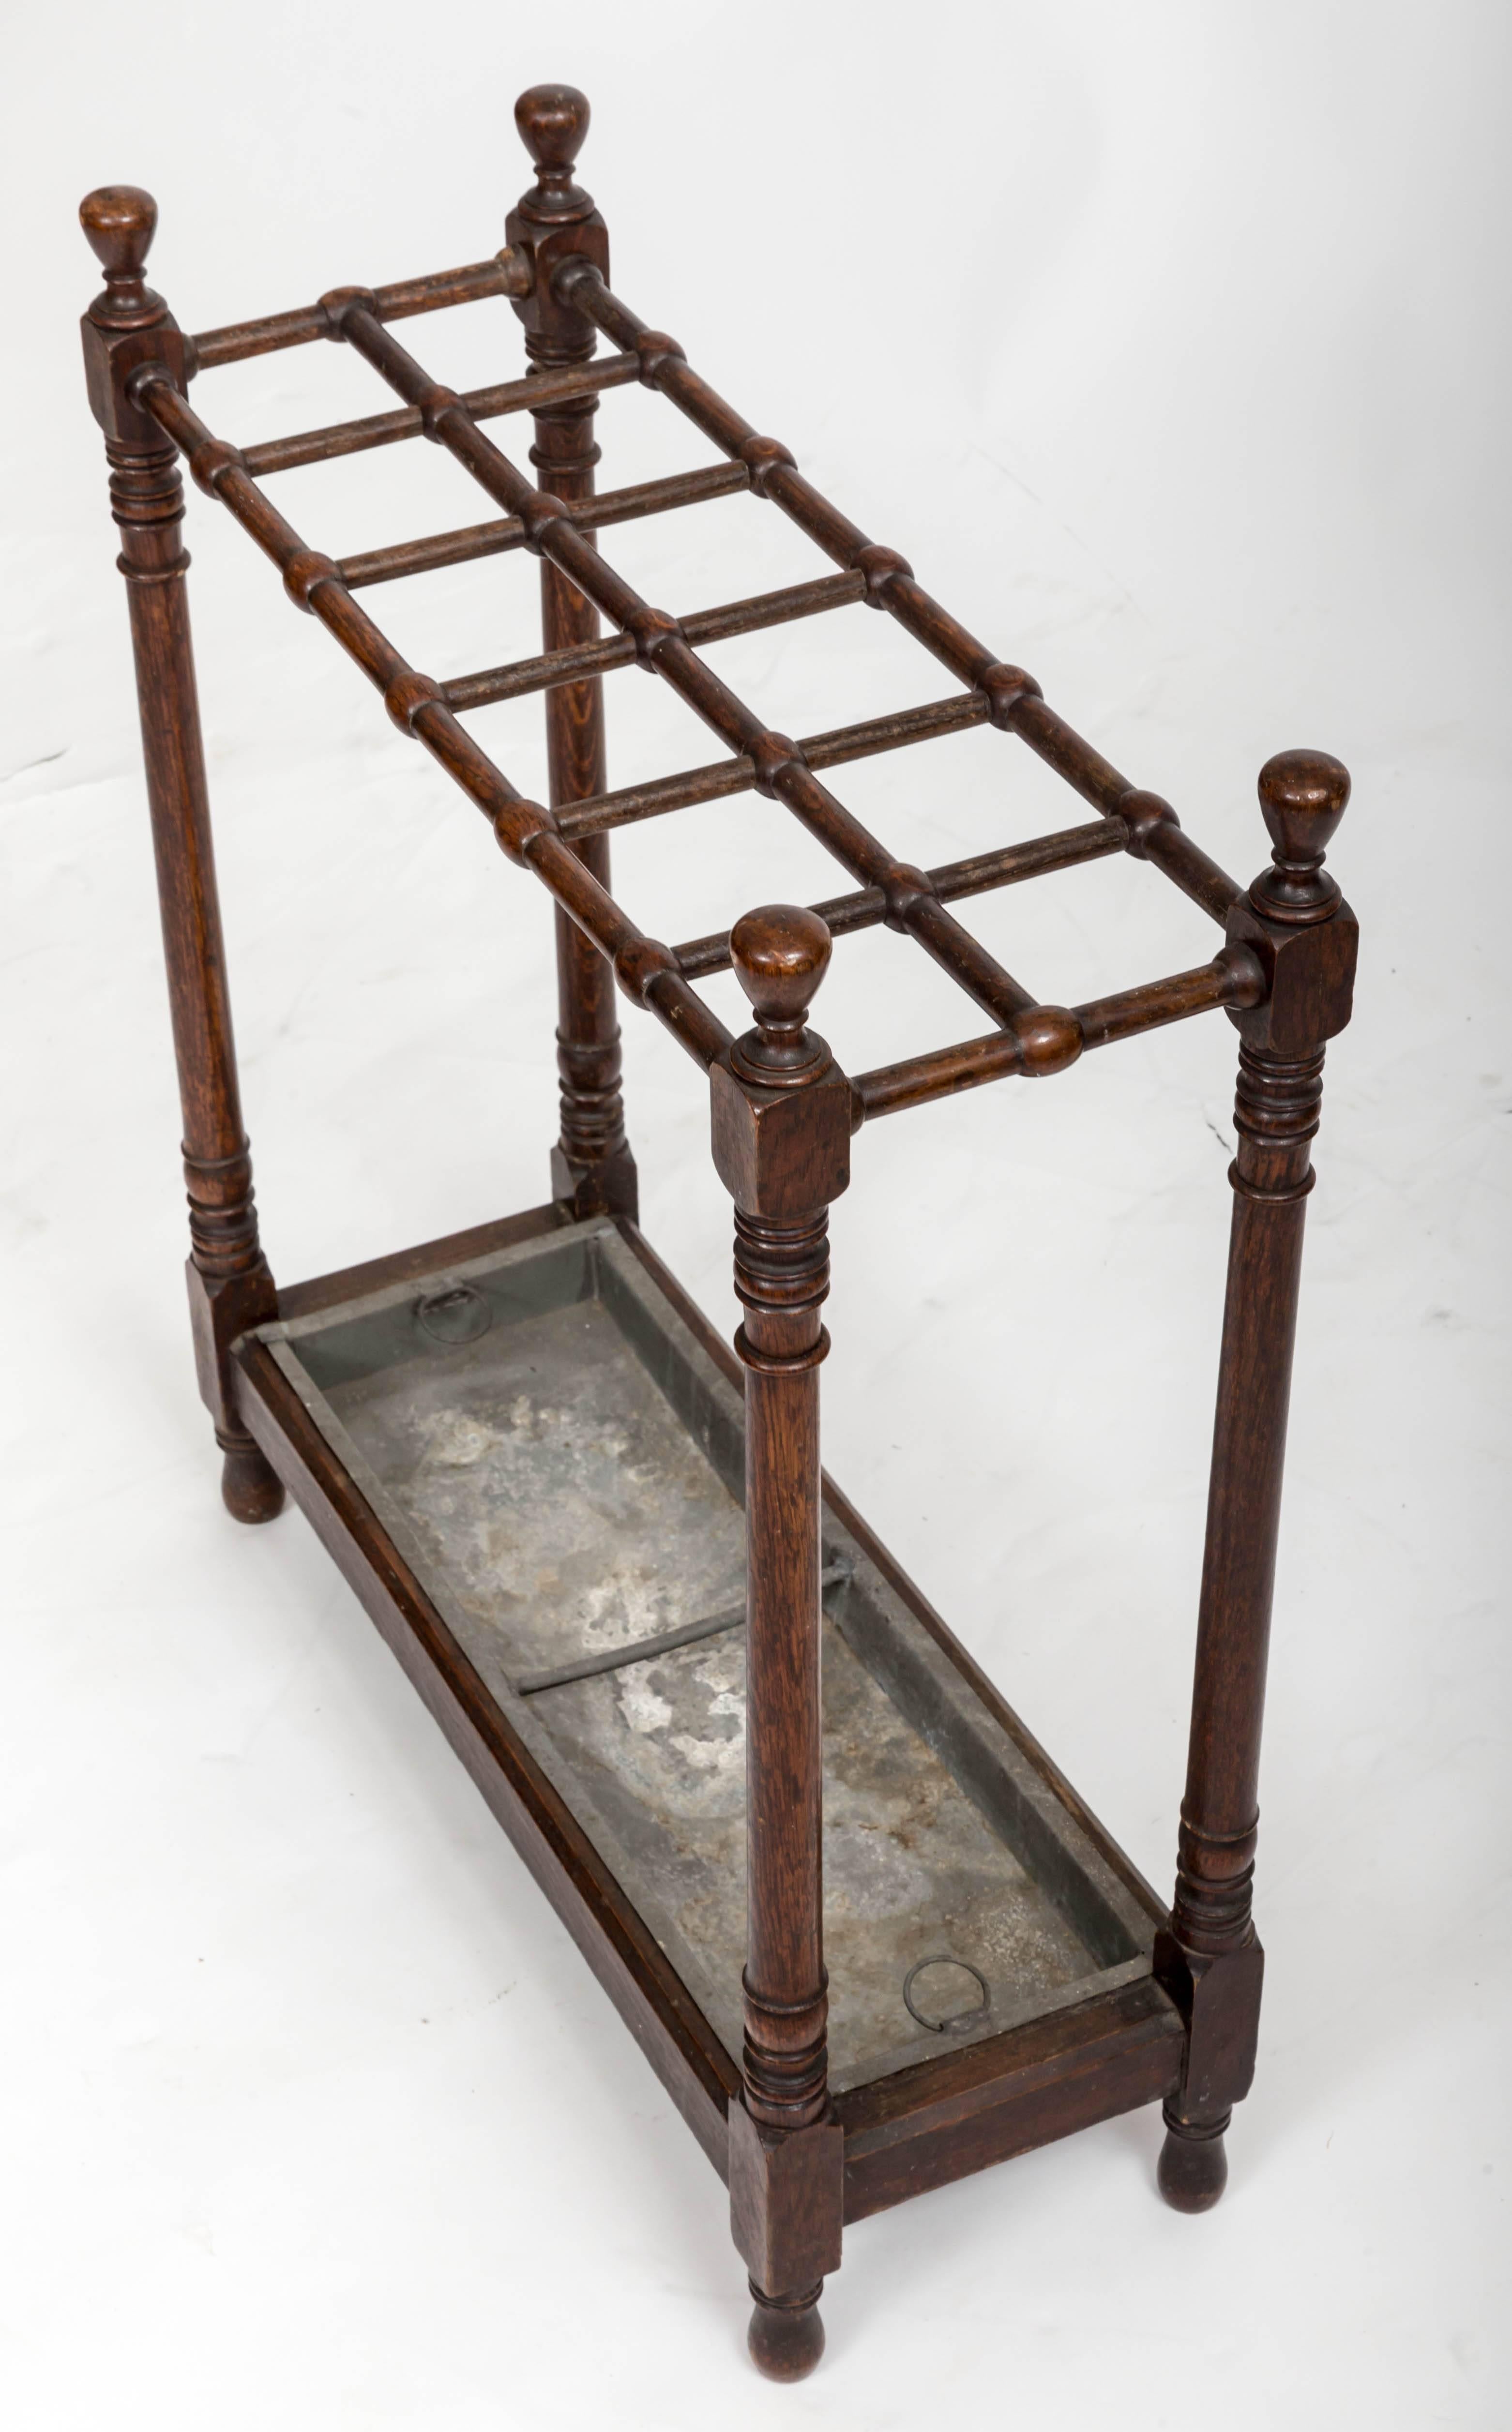 Twelve stick umbrella stand with turned wooden frame and original drip tray.